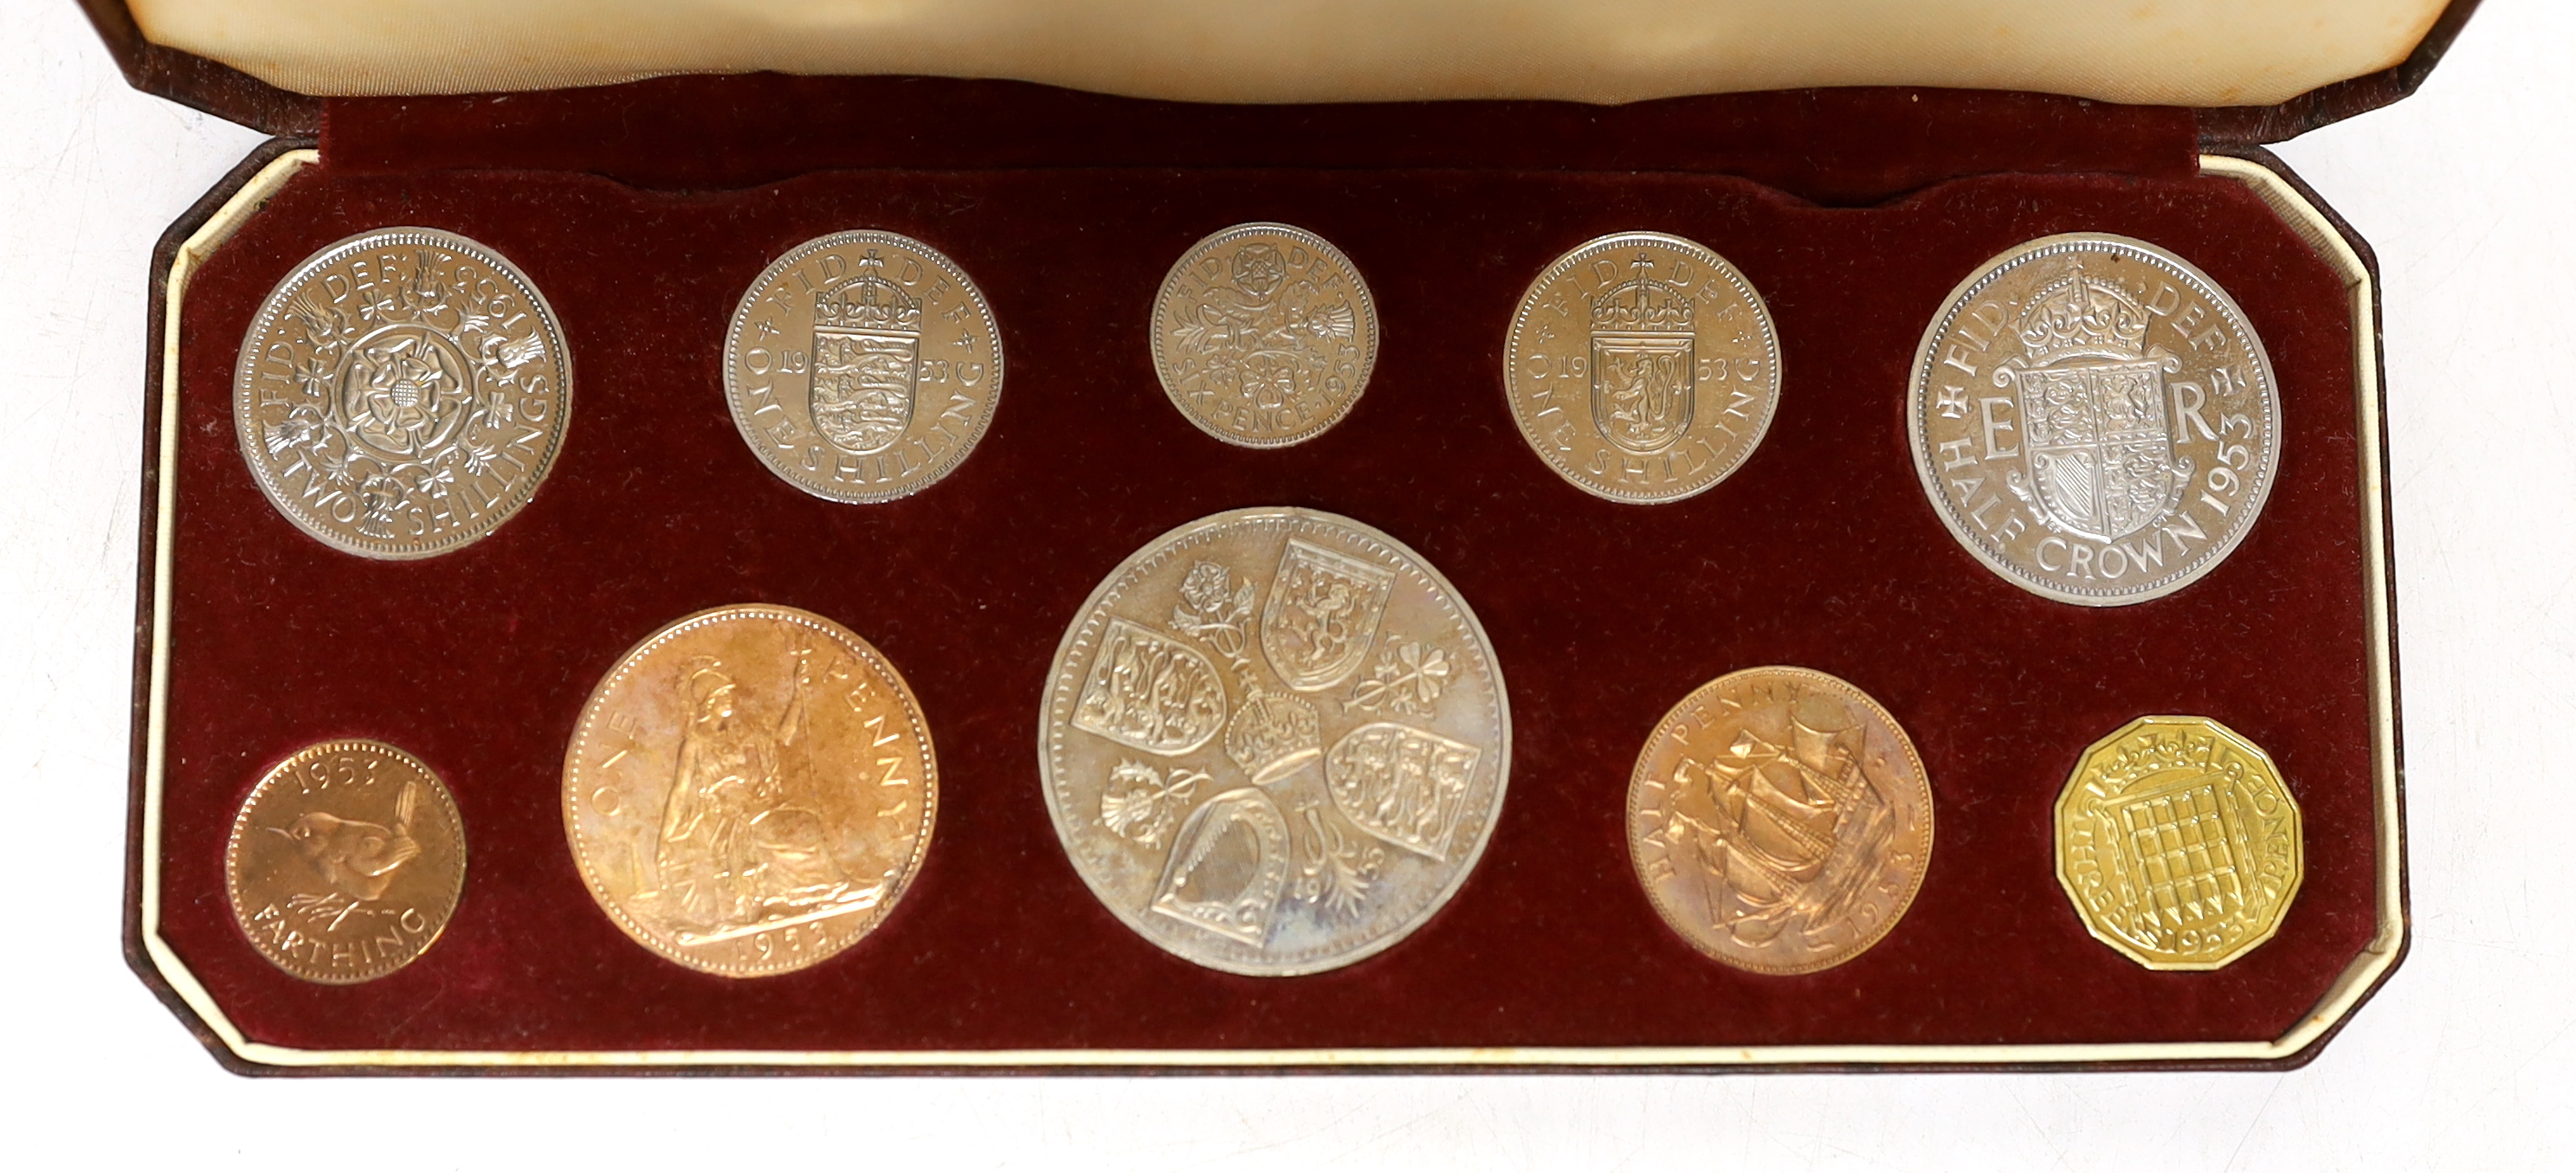 British Coins, QEII proof coin set for 1953